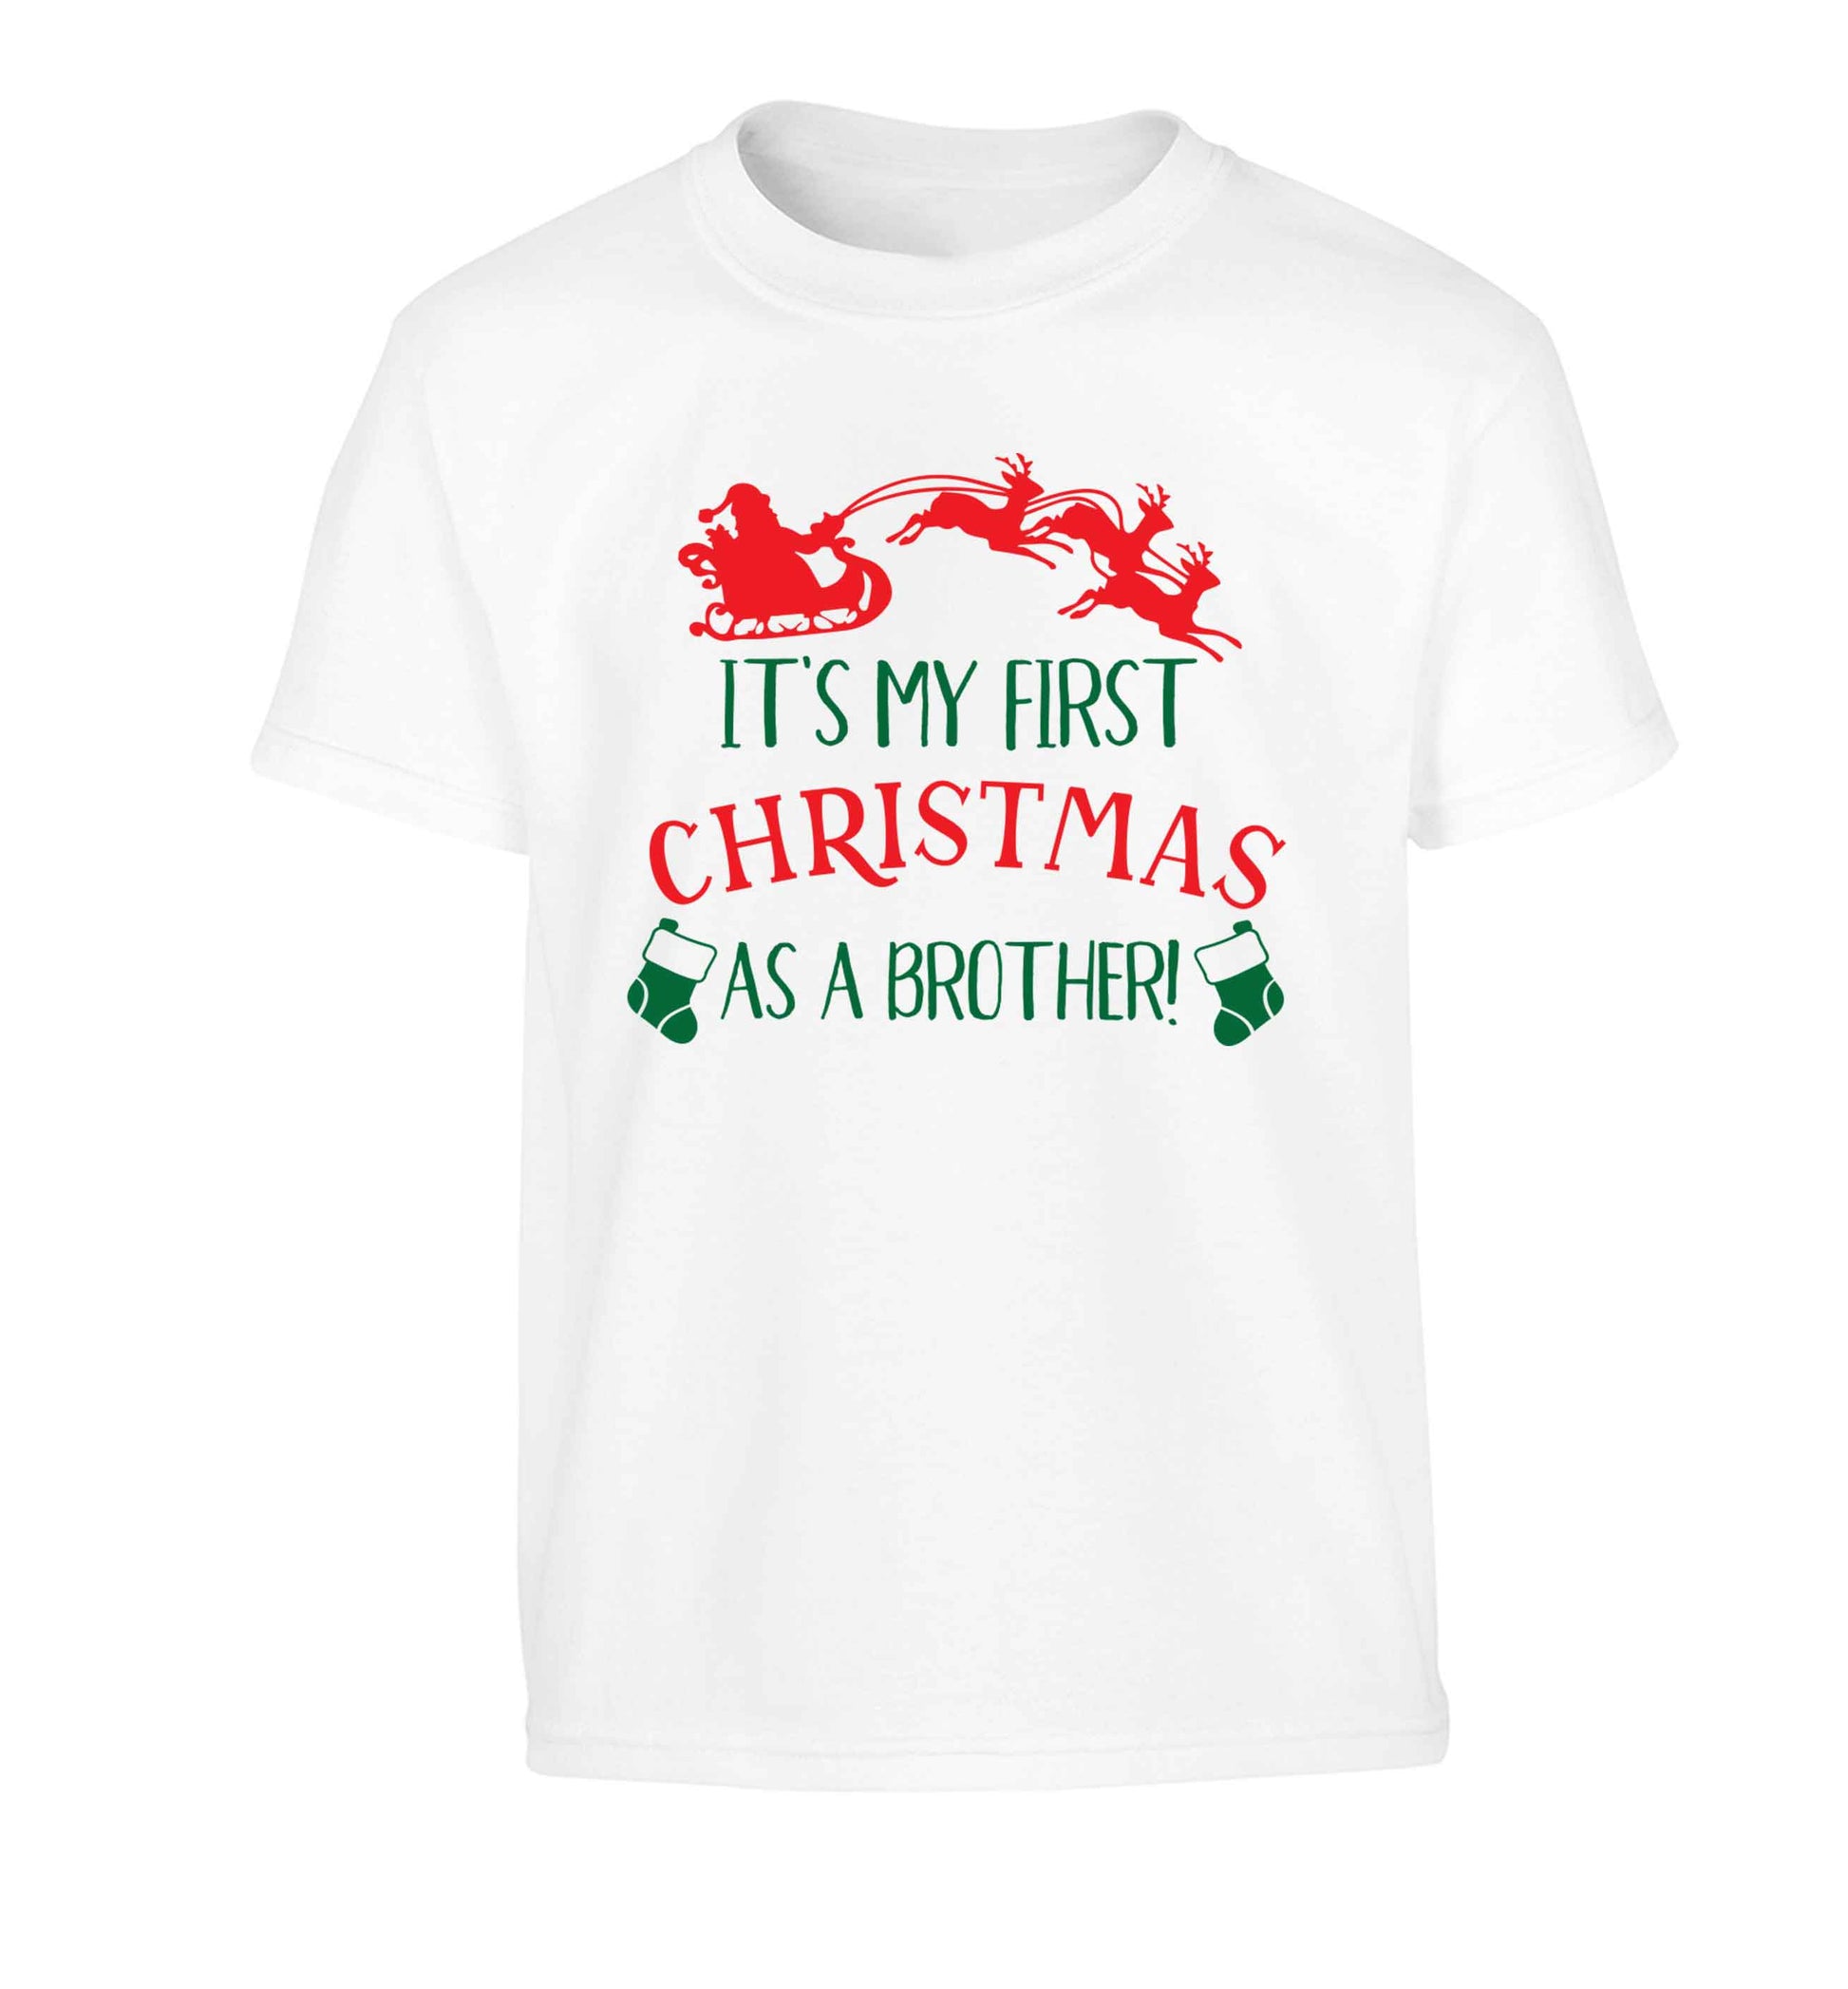 It's my first Christmas as a brother! Children's white Tshirt 12-13 Years